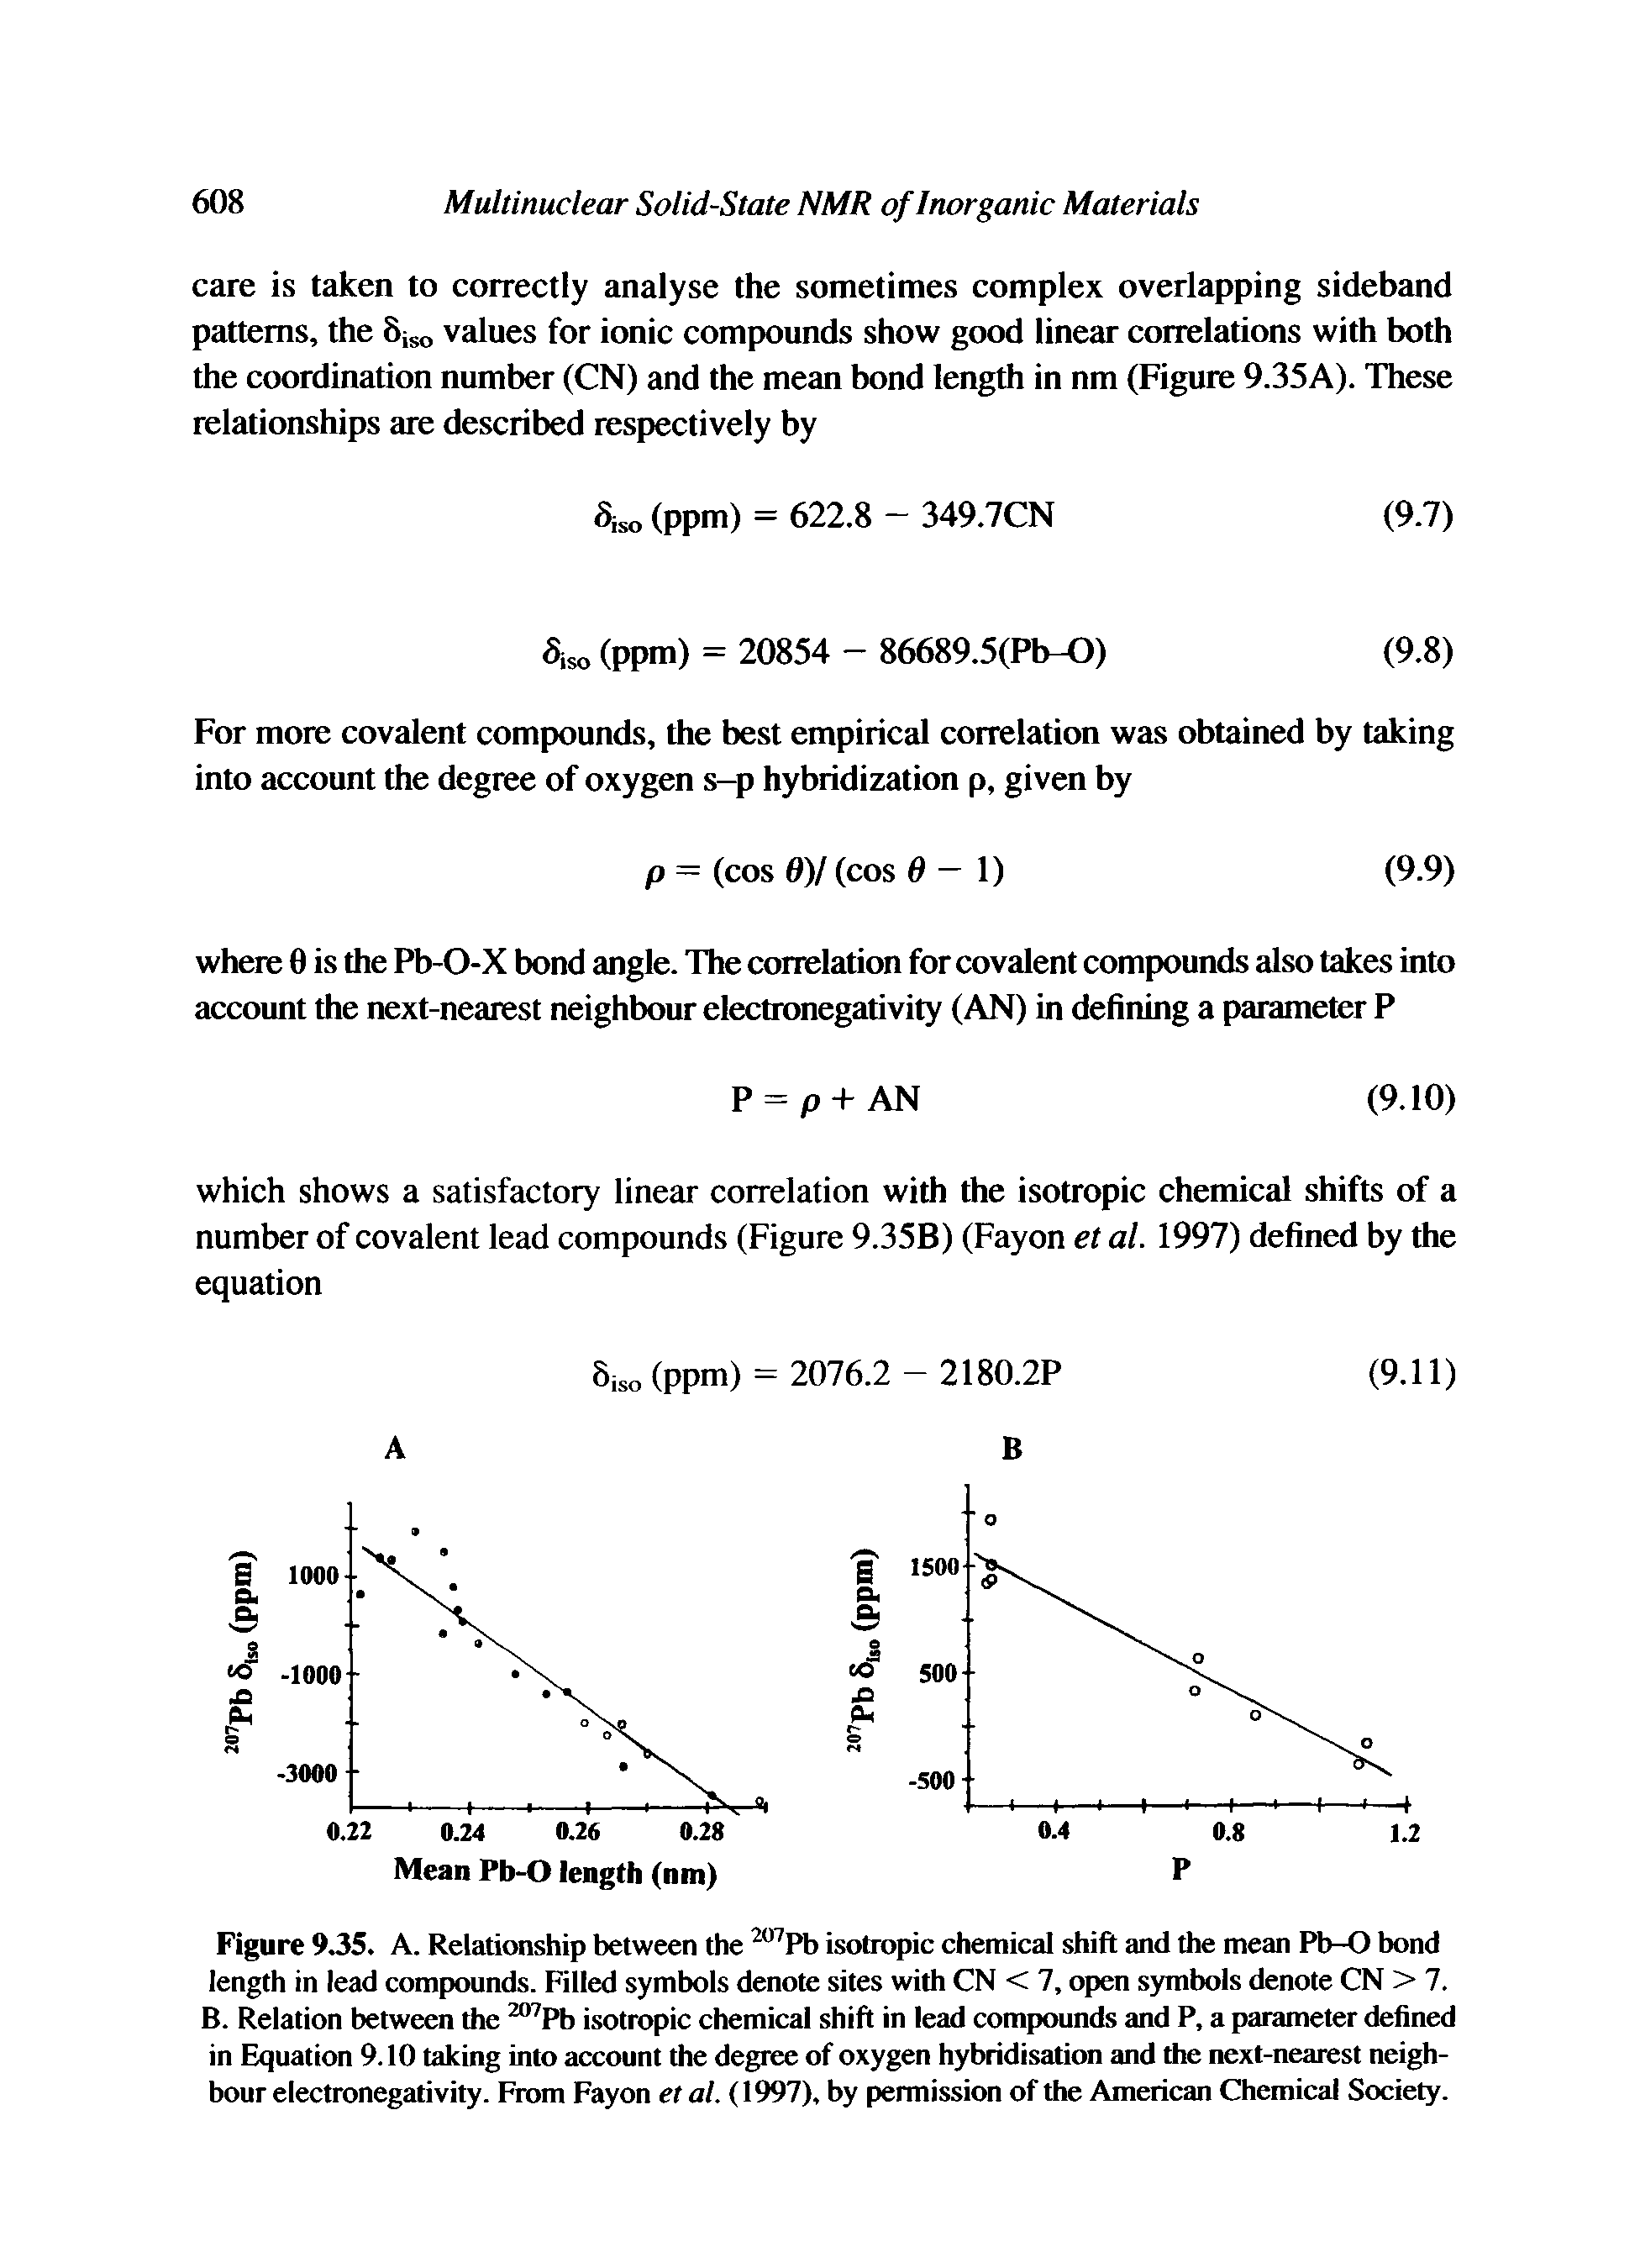 Figure 935. A. Relationship between the isotropic chemical shift and the mean Pb-O bond length in lead compounds. Filled symbols denote sites with CN < 7, open symbols denote CN > 7. B. Relation between the Pb isotropic chemical shift in lead compounds and P, a parameter defined in Equation 9.10 taking into account the degree of oxygen hybridisation and the next-nearest neighbour electronegativity. From Fayon et al. (1997), by permission of the American Chemical Society.